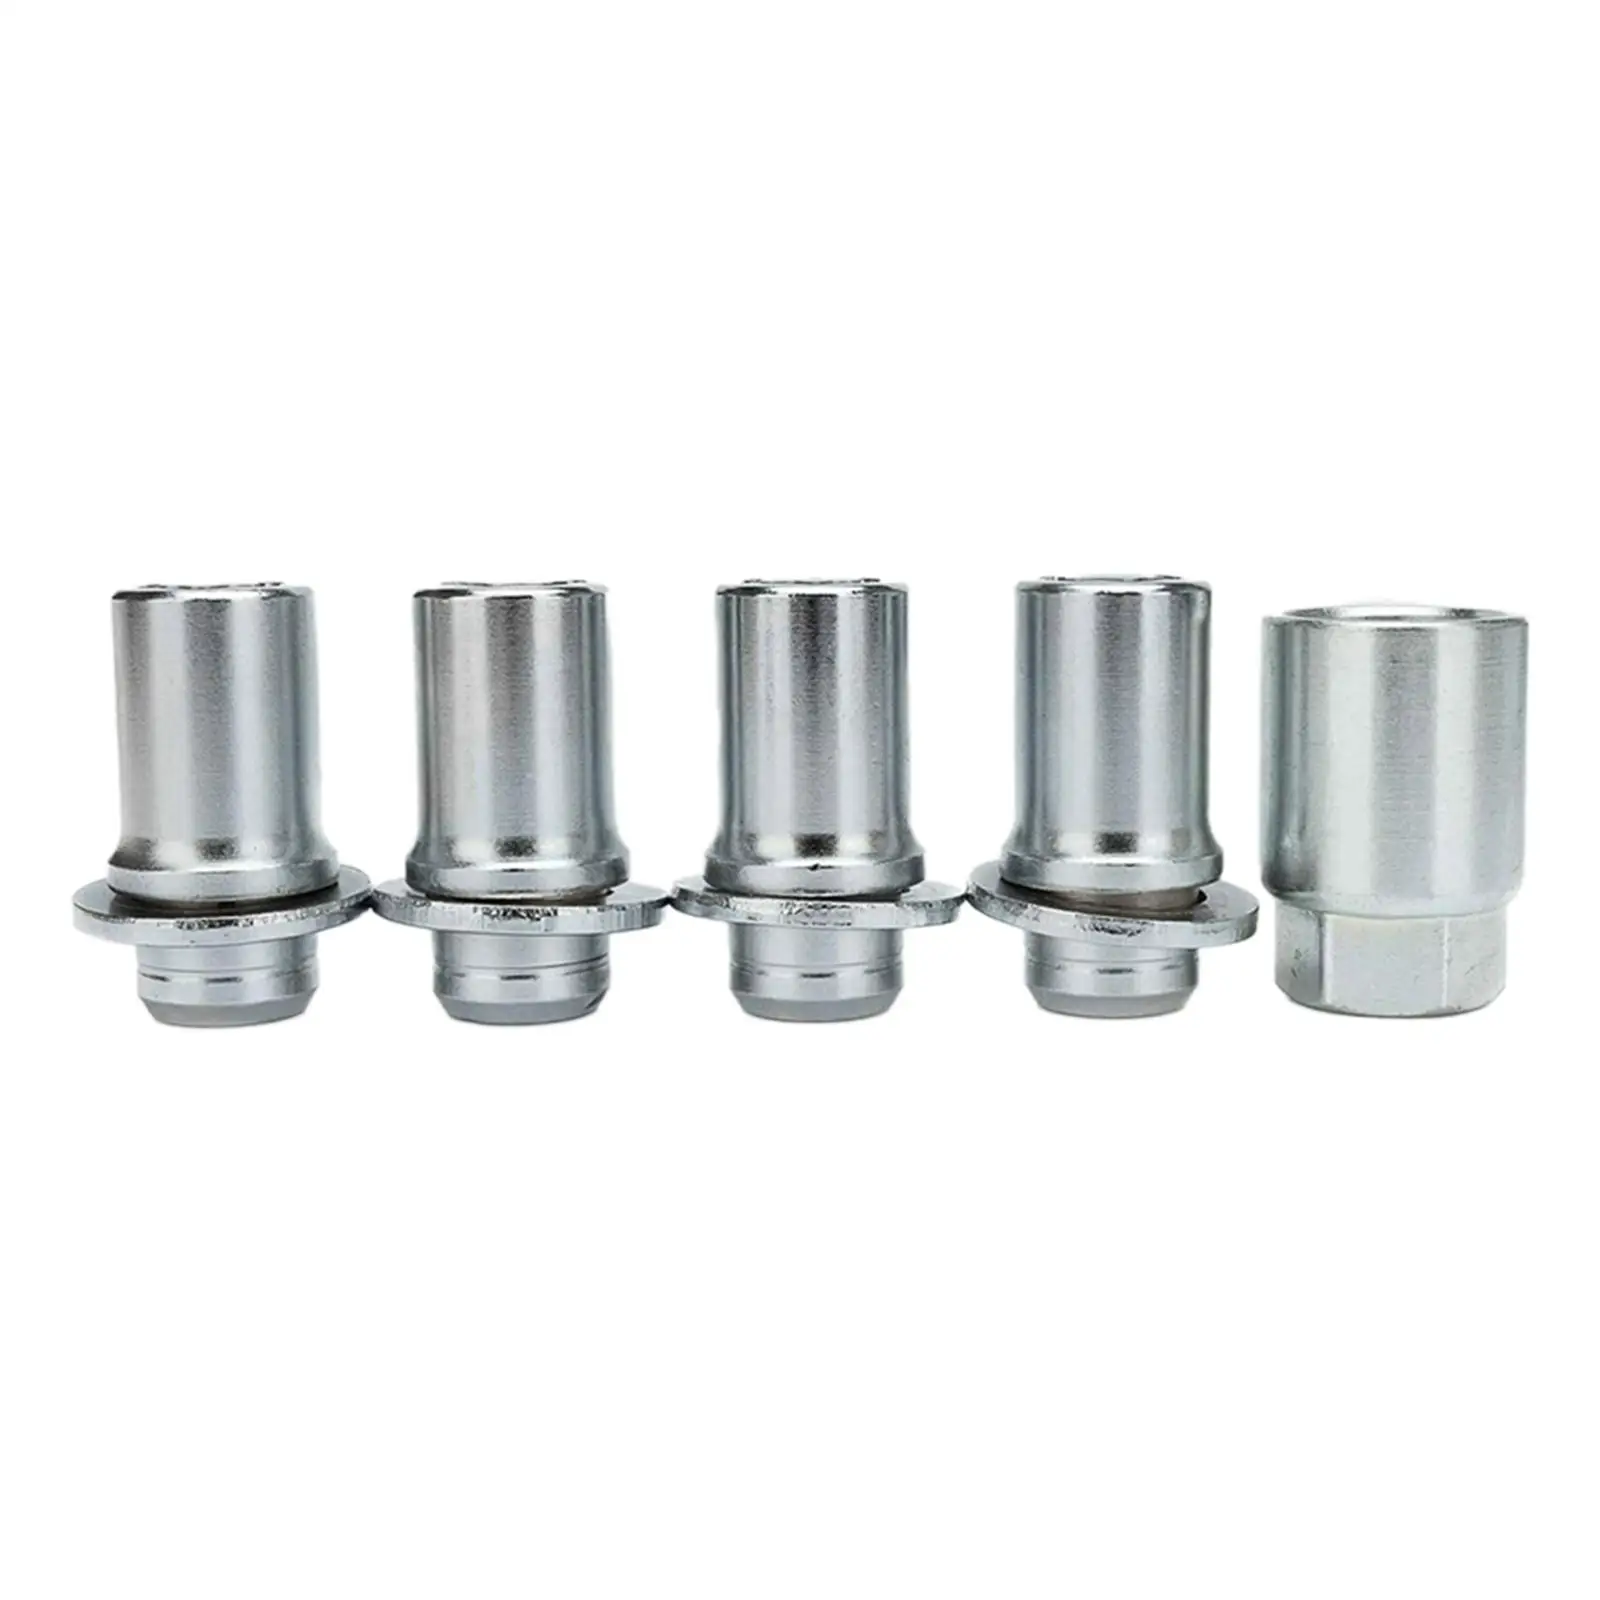 5 Pieces Car Wheel Lock Lug Nut Set 00276-00901 Anti Theft M12x1.5 Replace for 4RUNNER Corolla for HIGHLANDER Sequoia GS400